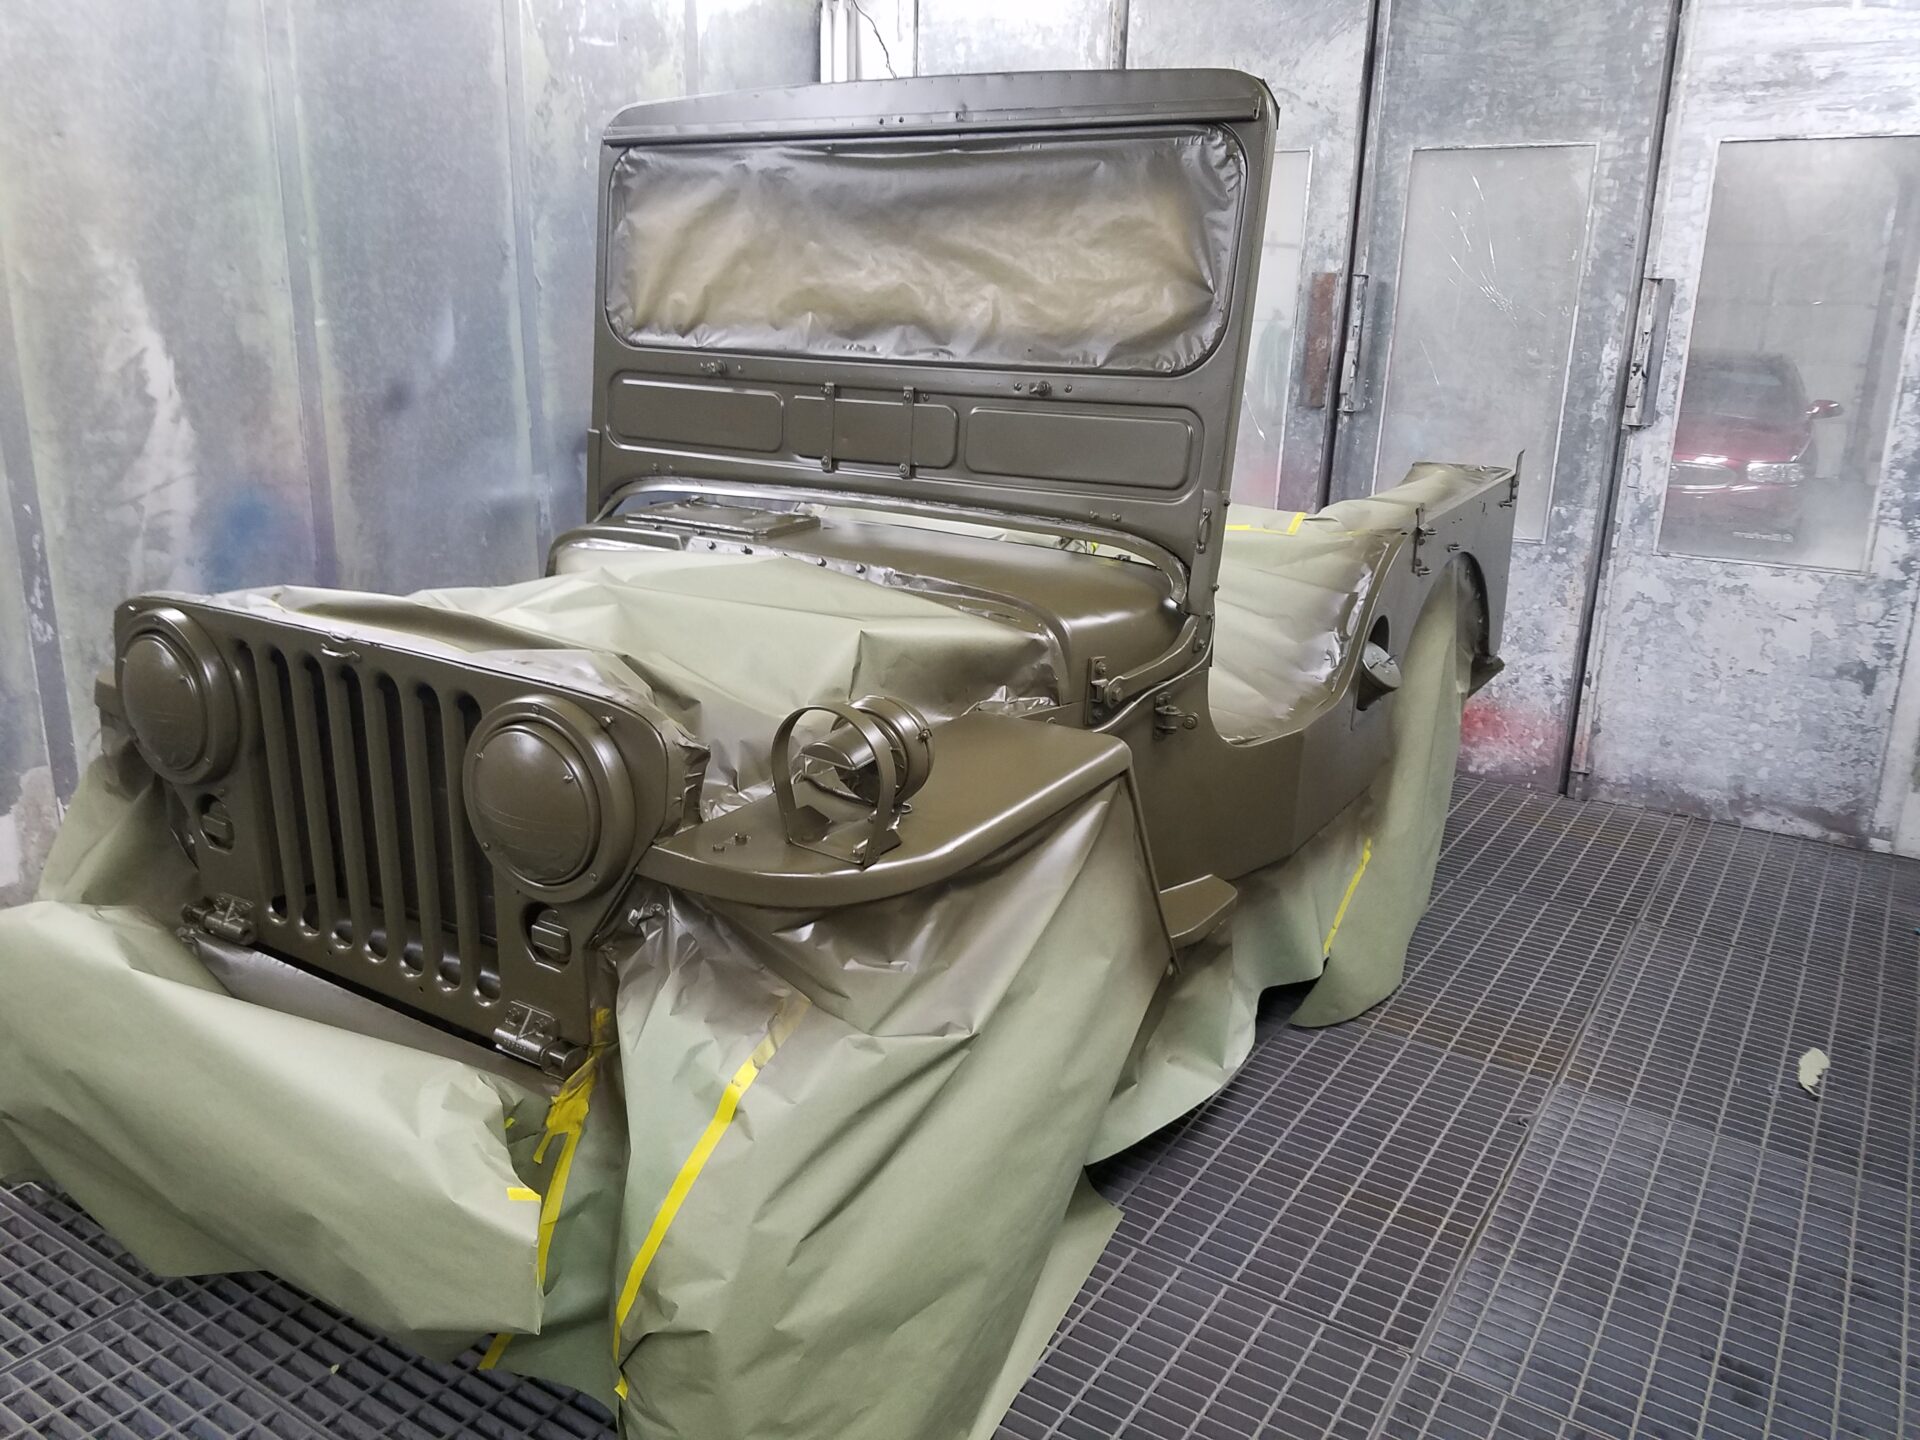 A partially painted 1951 military jeep model